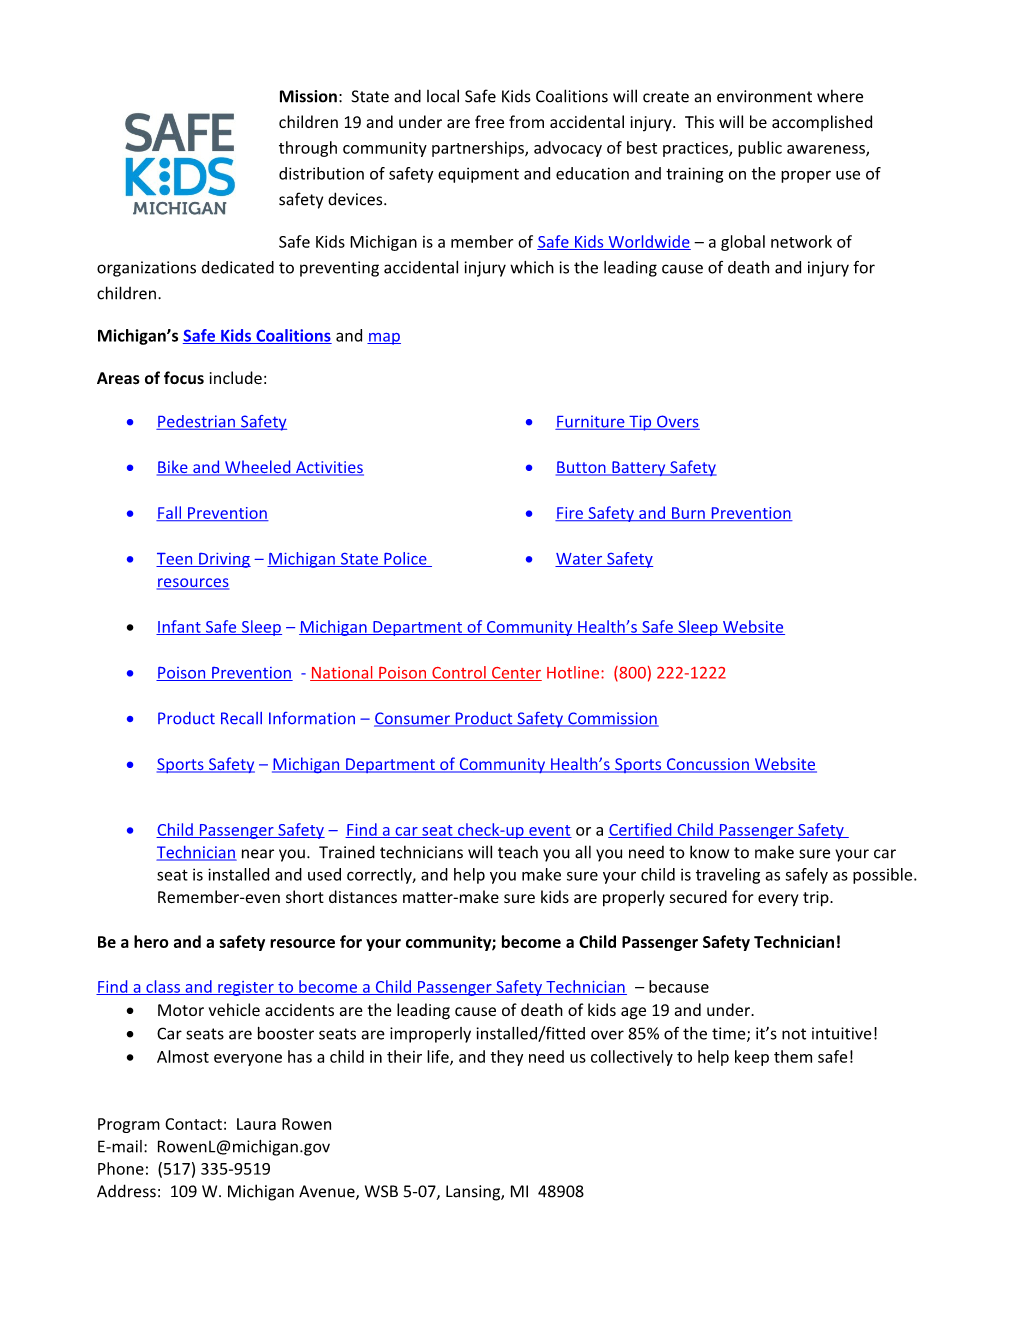 Michigan S Safe Kids Coalitions and Map